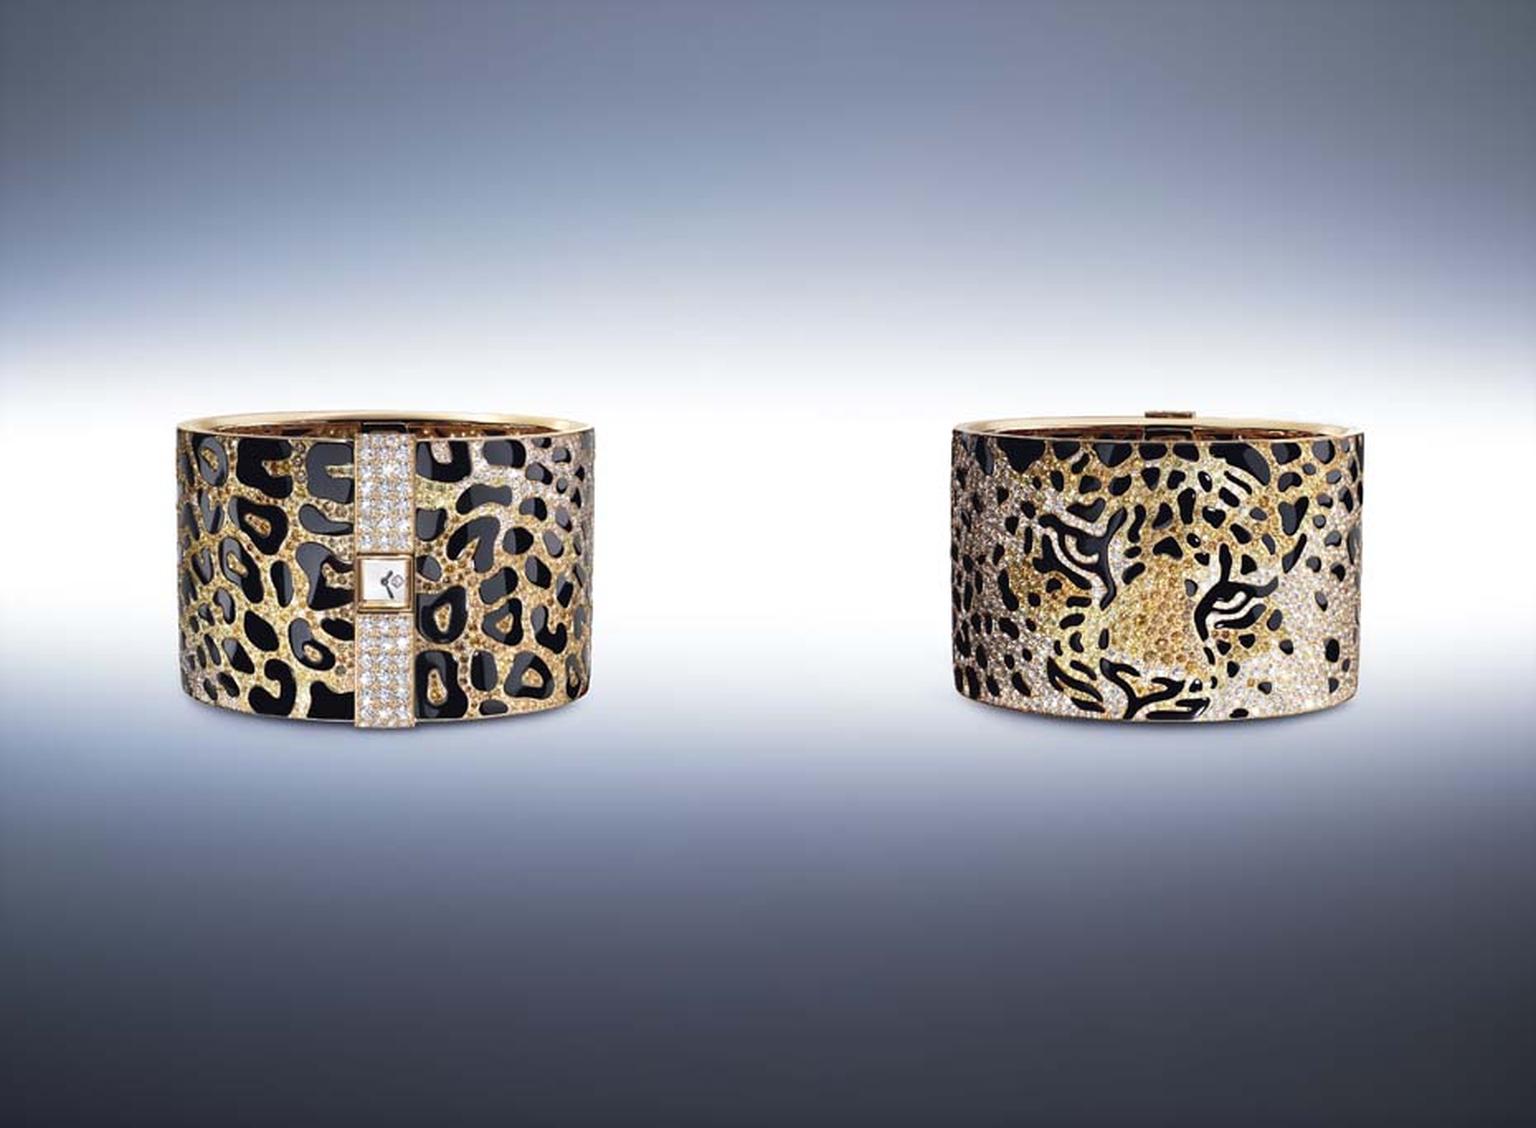 Cartier Panthère Impériale High Jewellery cuff watch recreates the maison's most famous feline, brought to life with an incredible paving of different coloured diamonds and onyx.